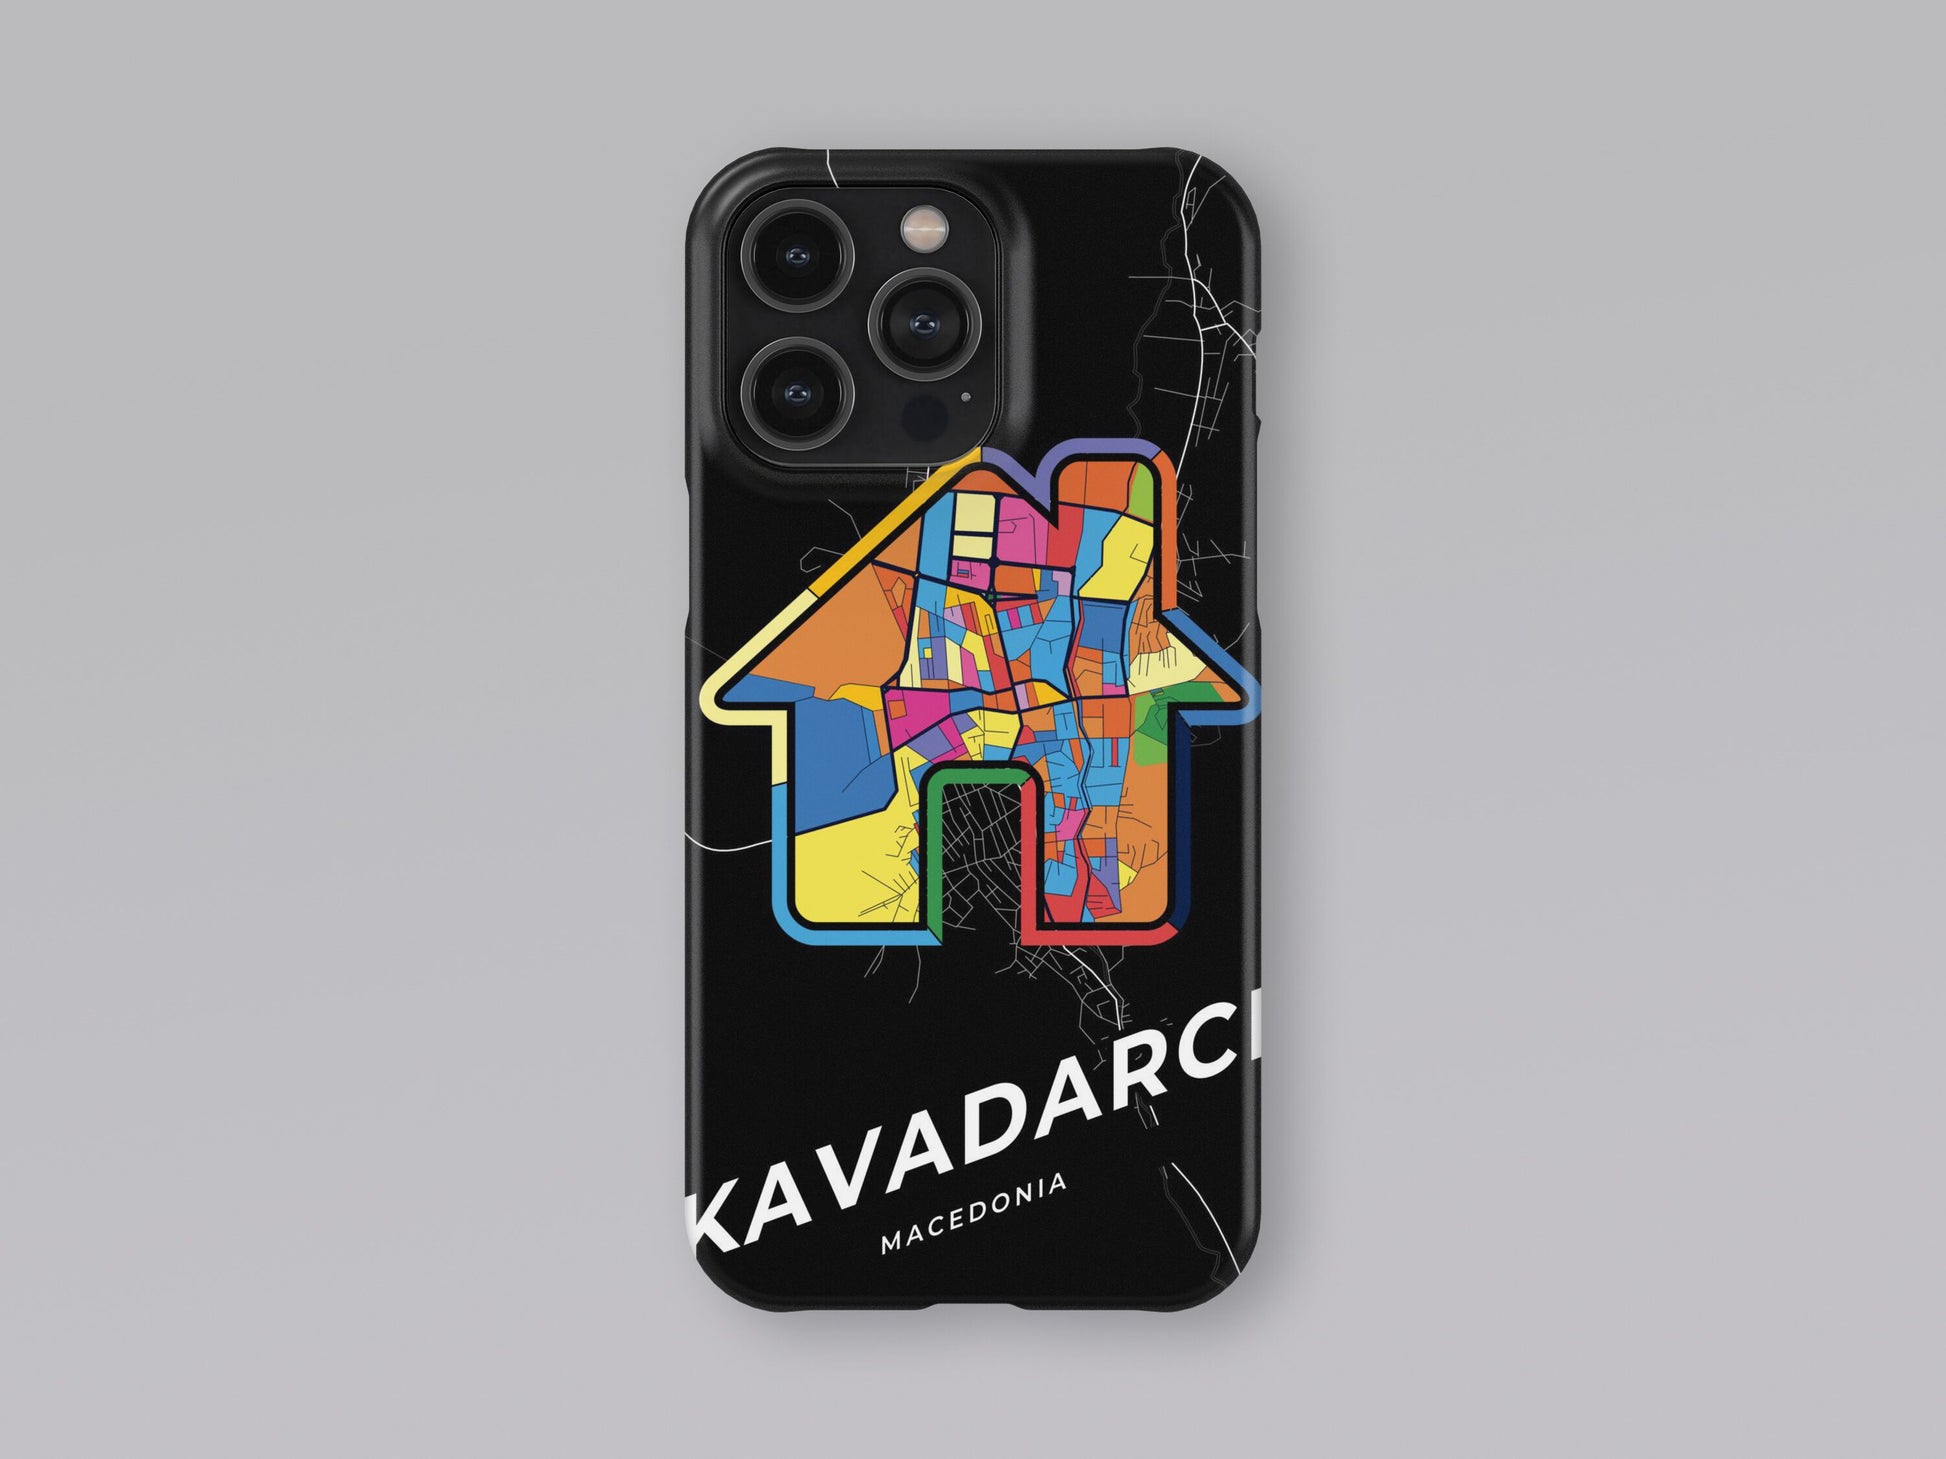 Kavadarci North Macedonia slim phone case with colorful icon. Birthday, wedding or housewarming gift. Couple match cases. 3